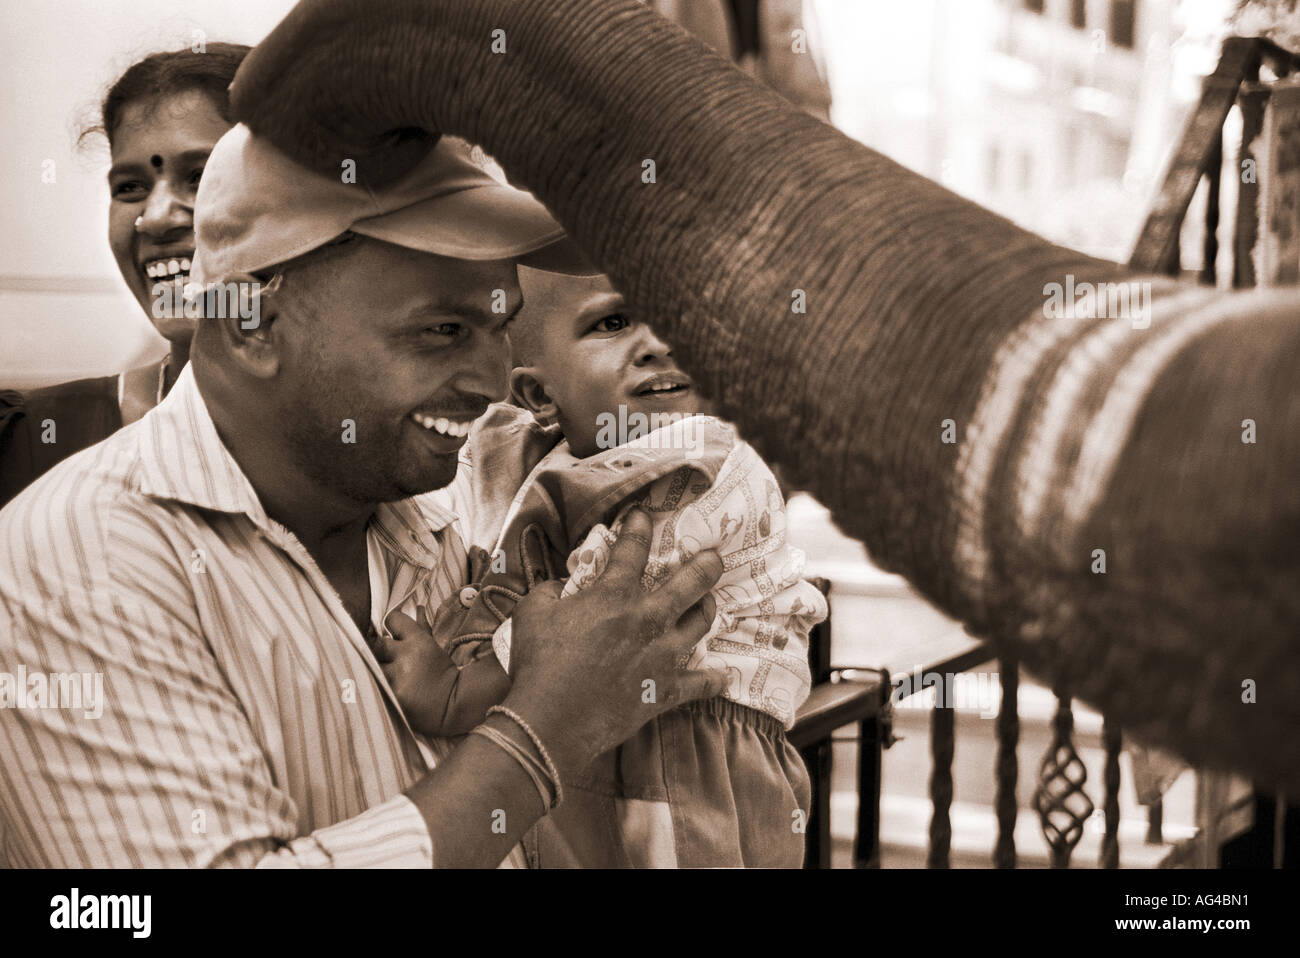 ARF79259 An elephant blesses a family on a street in Bangalore India Stock Photo